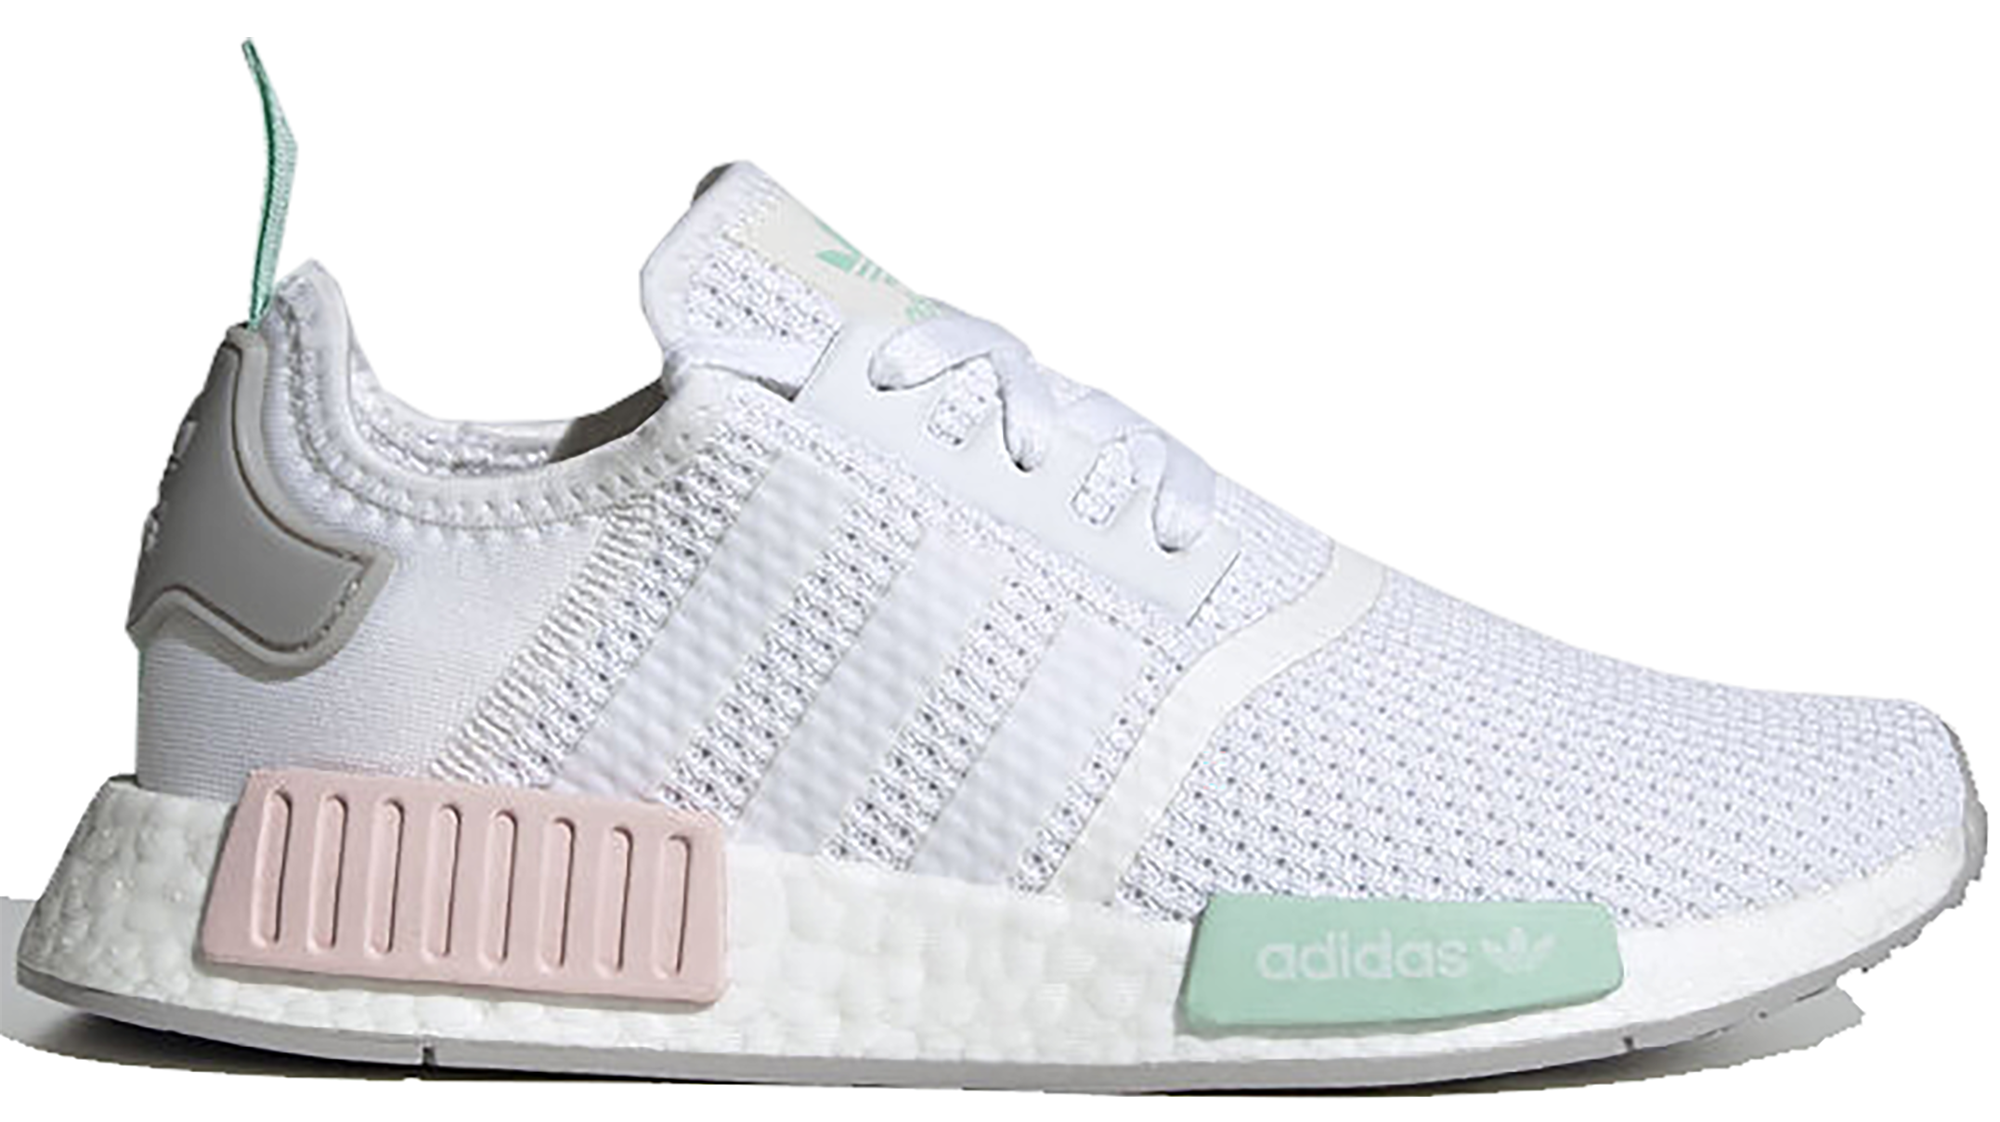 adidas nmd white and grey